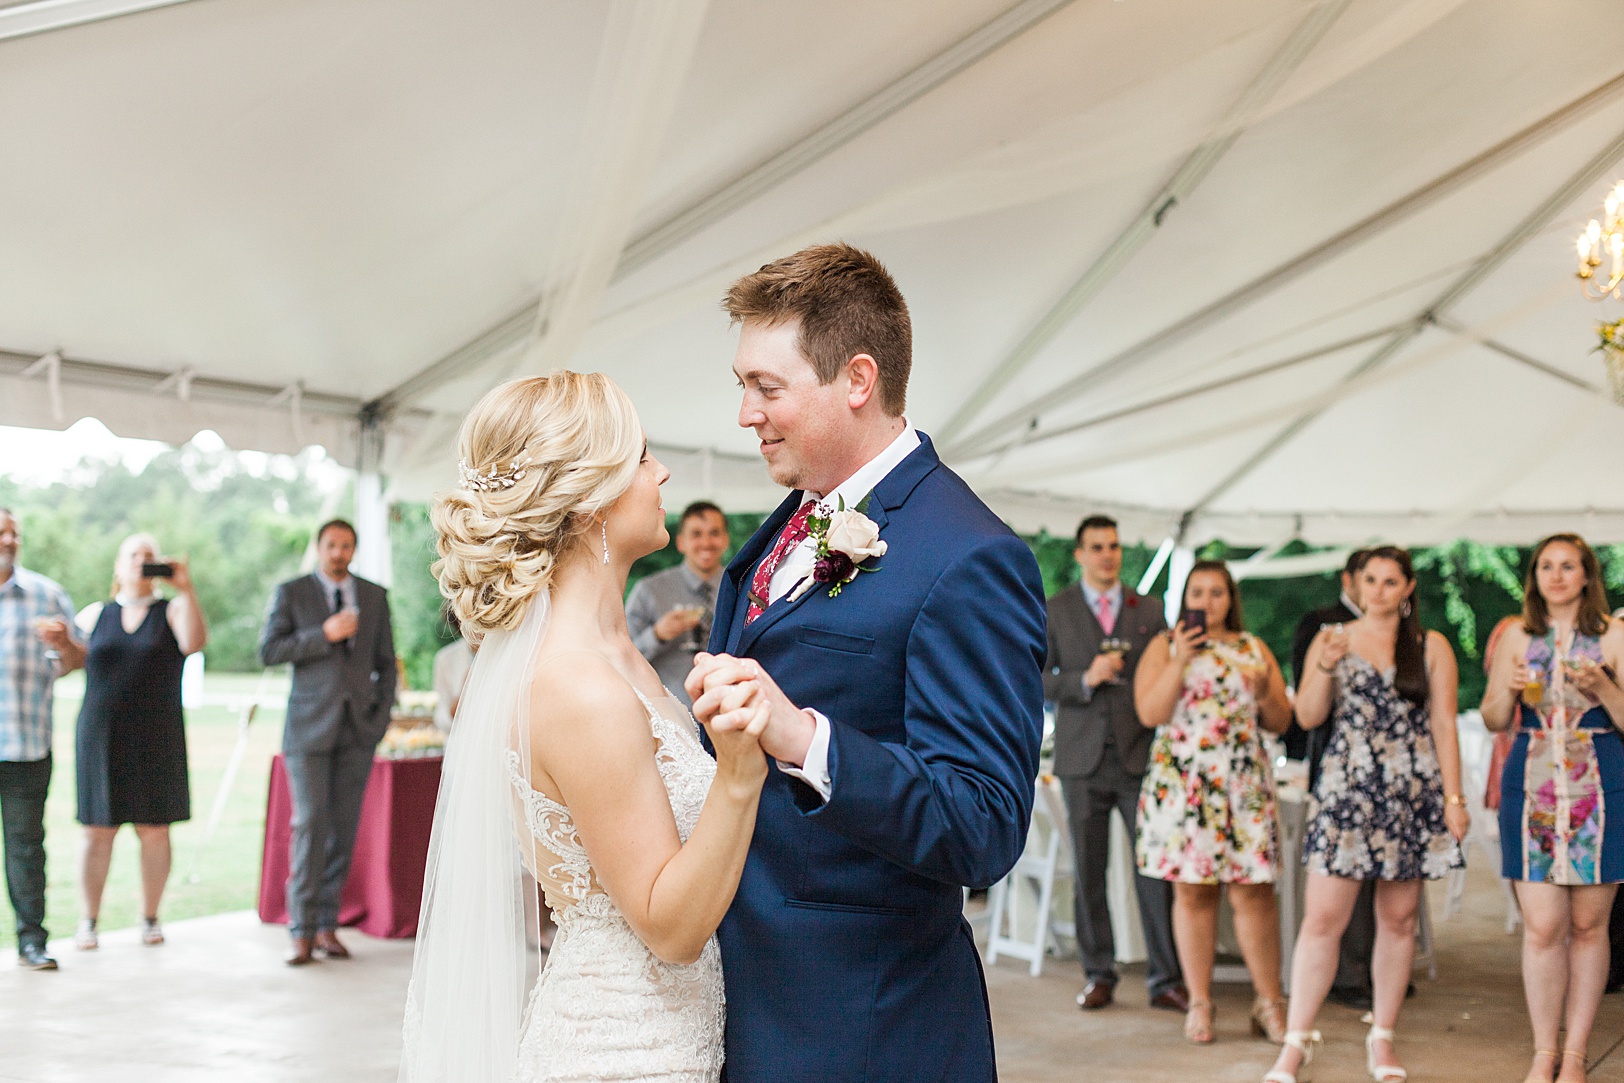 Wingate Plantation Wedding Bride and Groom First Dance | Kaitlin Scott Photography